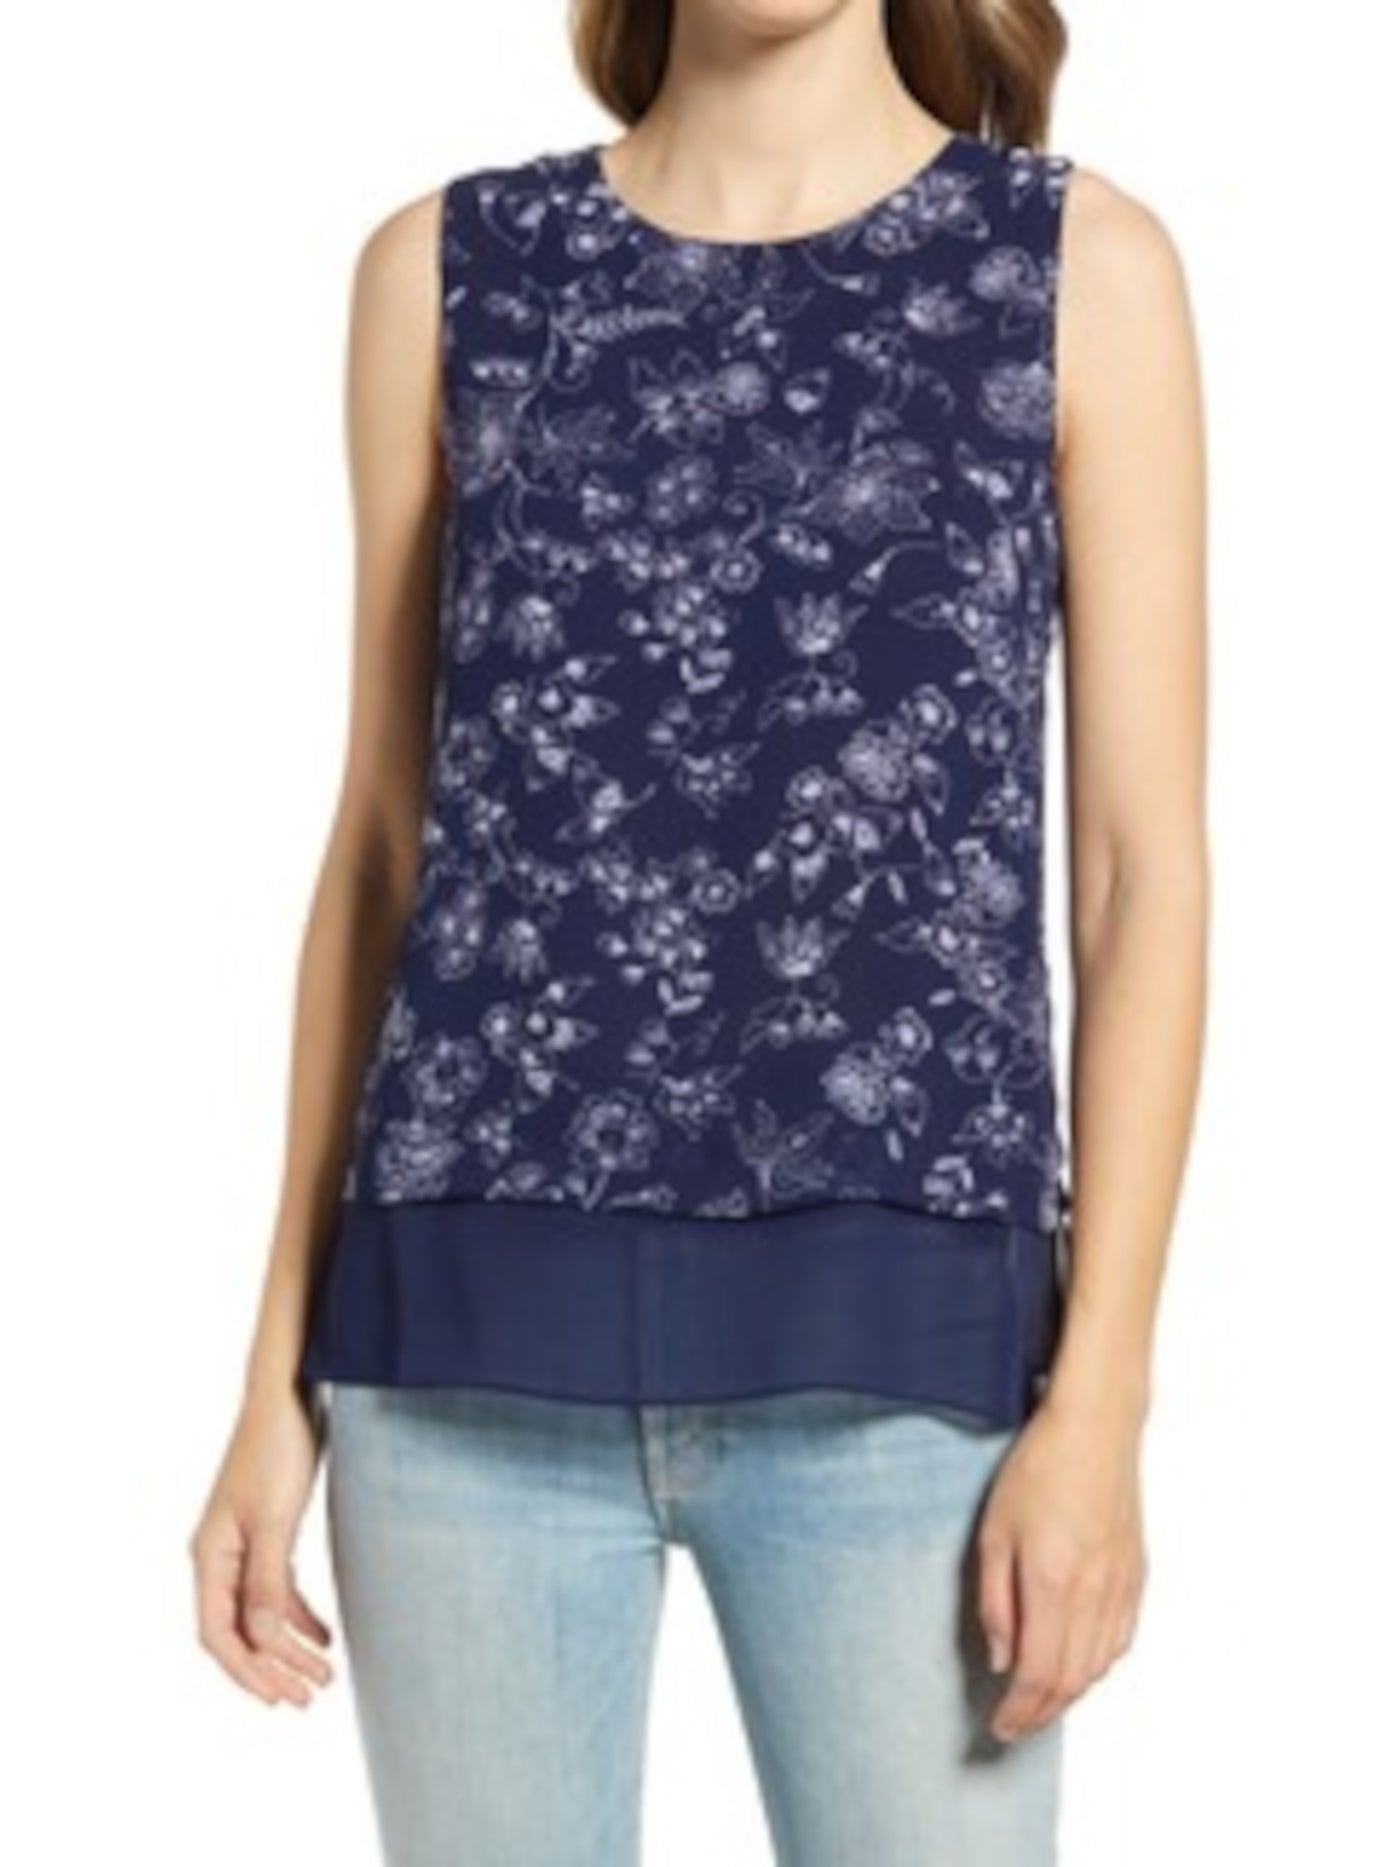 VINCE CAMUTO Womens Navy Printed Sleeveless Crew Neck Top M